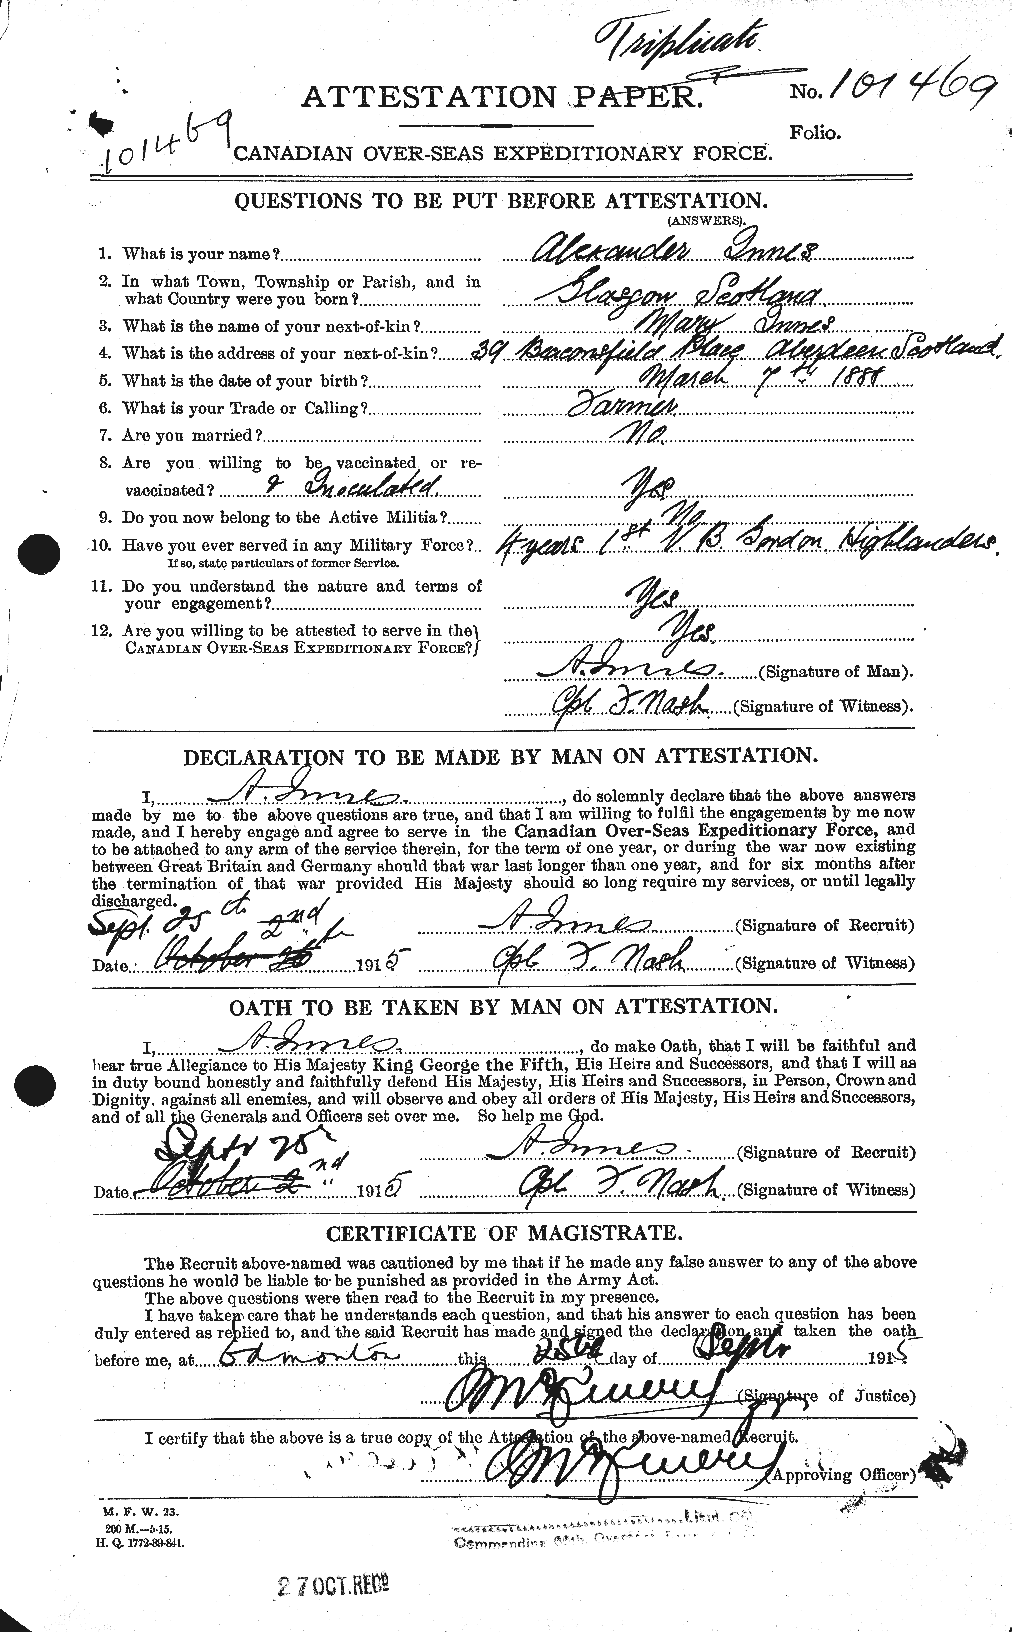 Personnel Records of the First World War - CEF 415376a